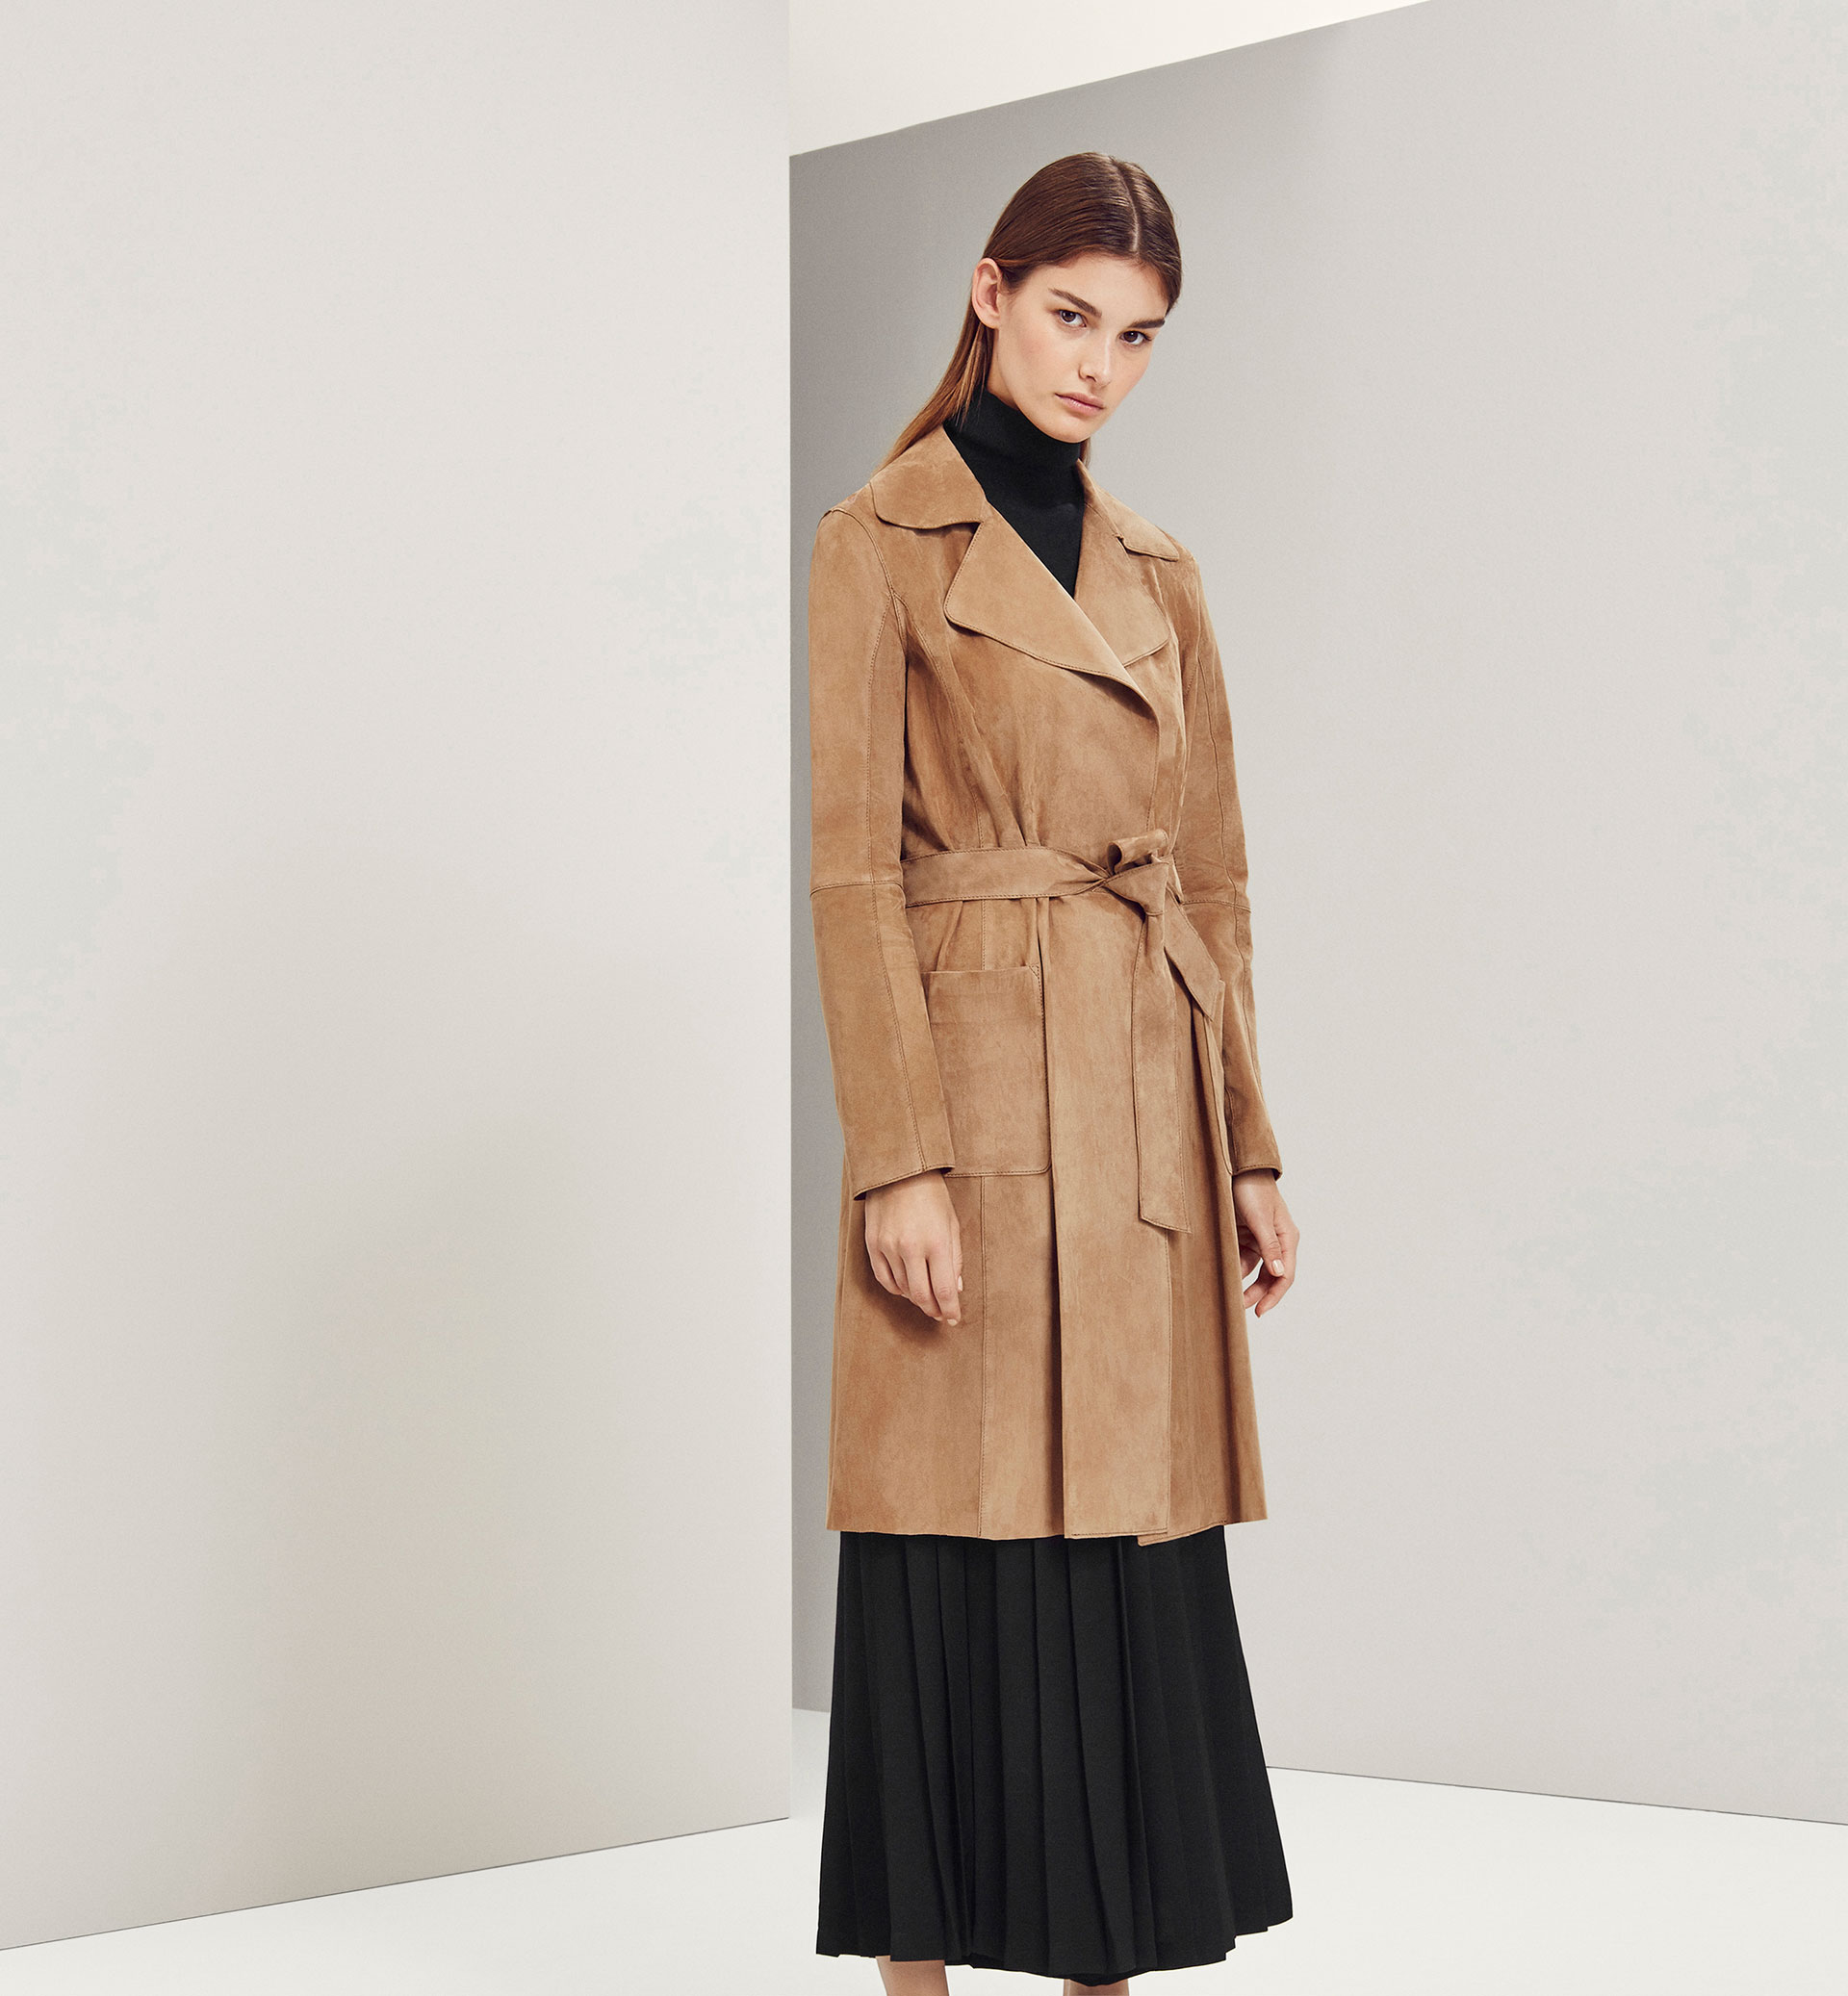 MASSIMO DUTTI (ZARA GROUP) WOMEN LIMITED EDITION SUEDE TRENCH COAT SS16 ...